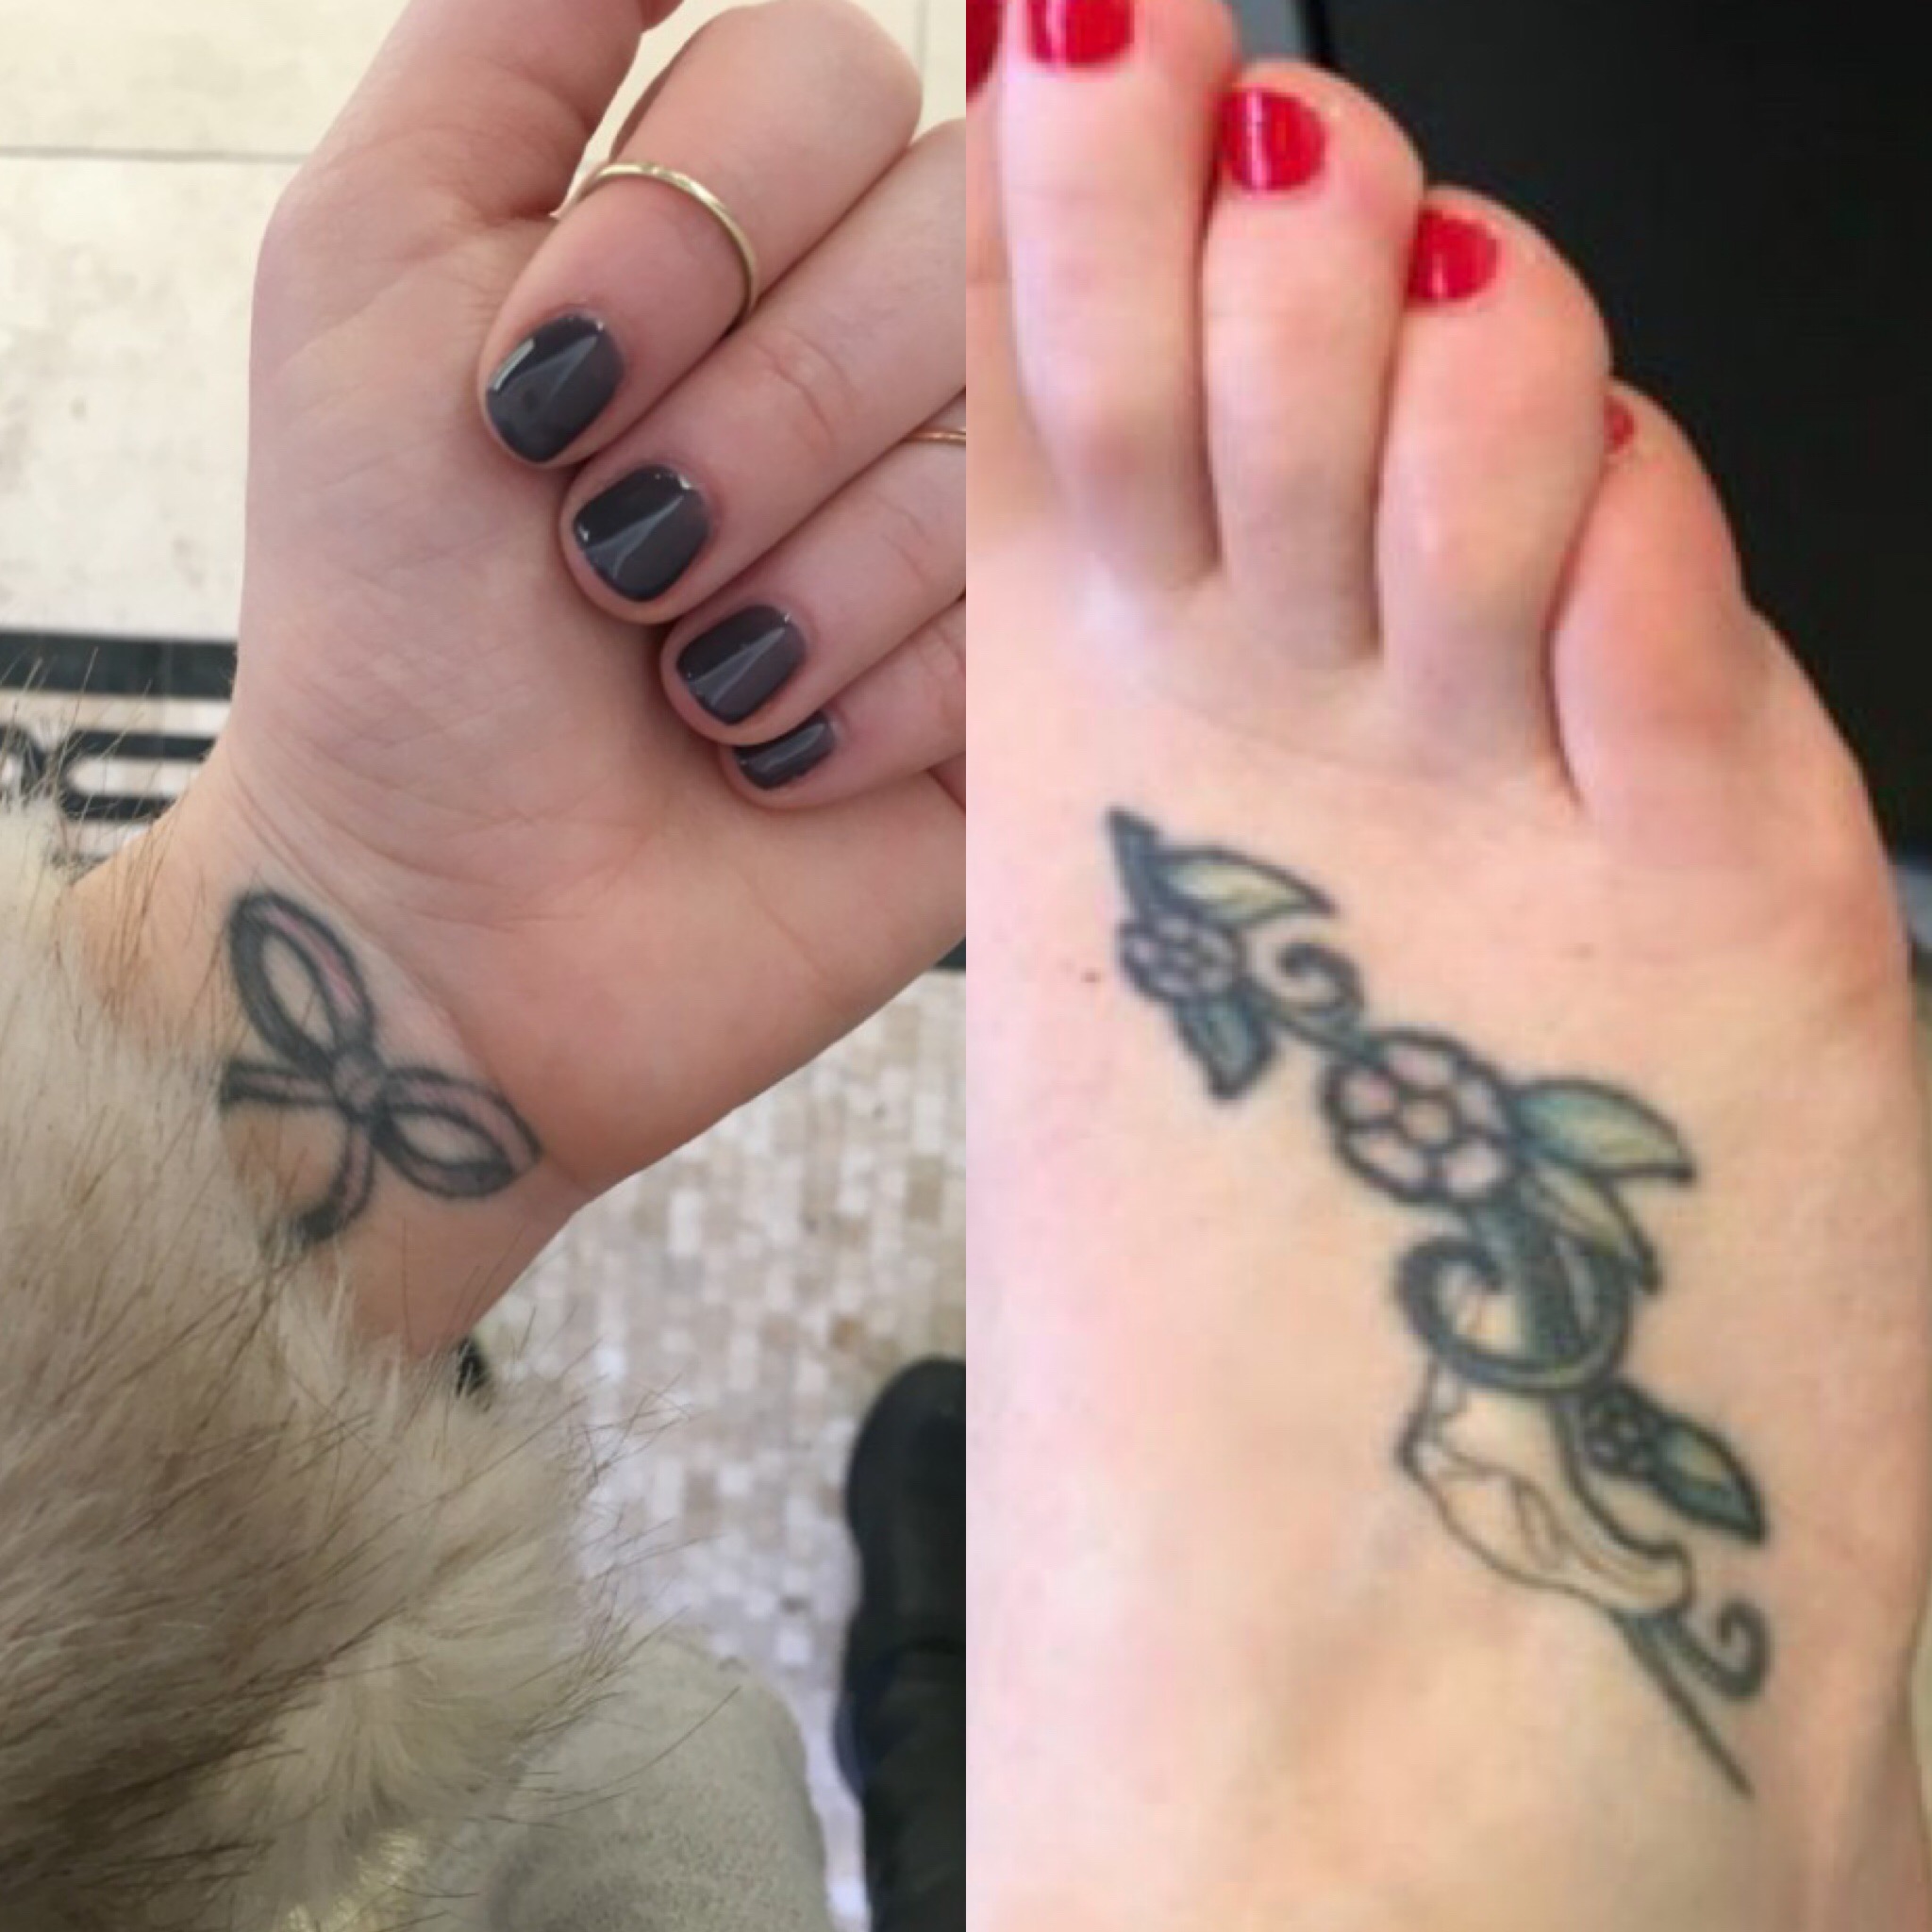 My Experience with Laser Tattoo Removal in NYC (before & after)